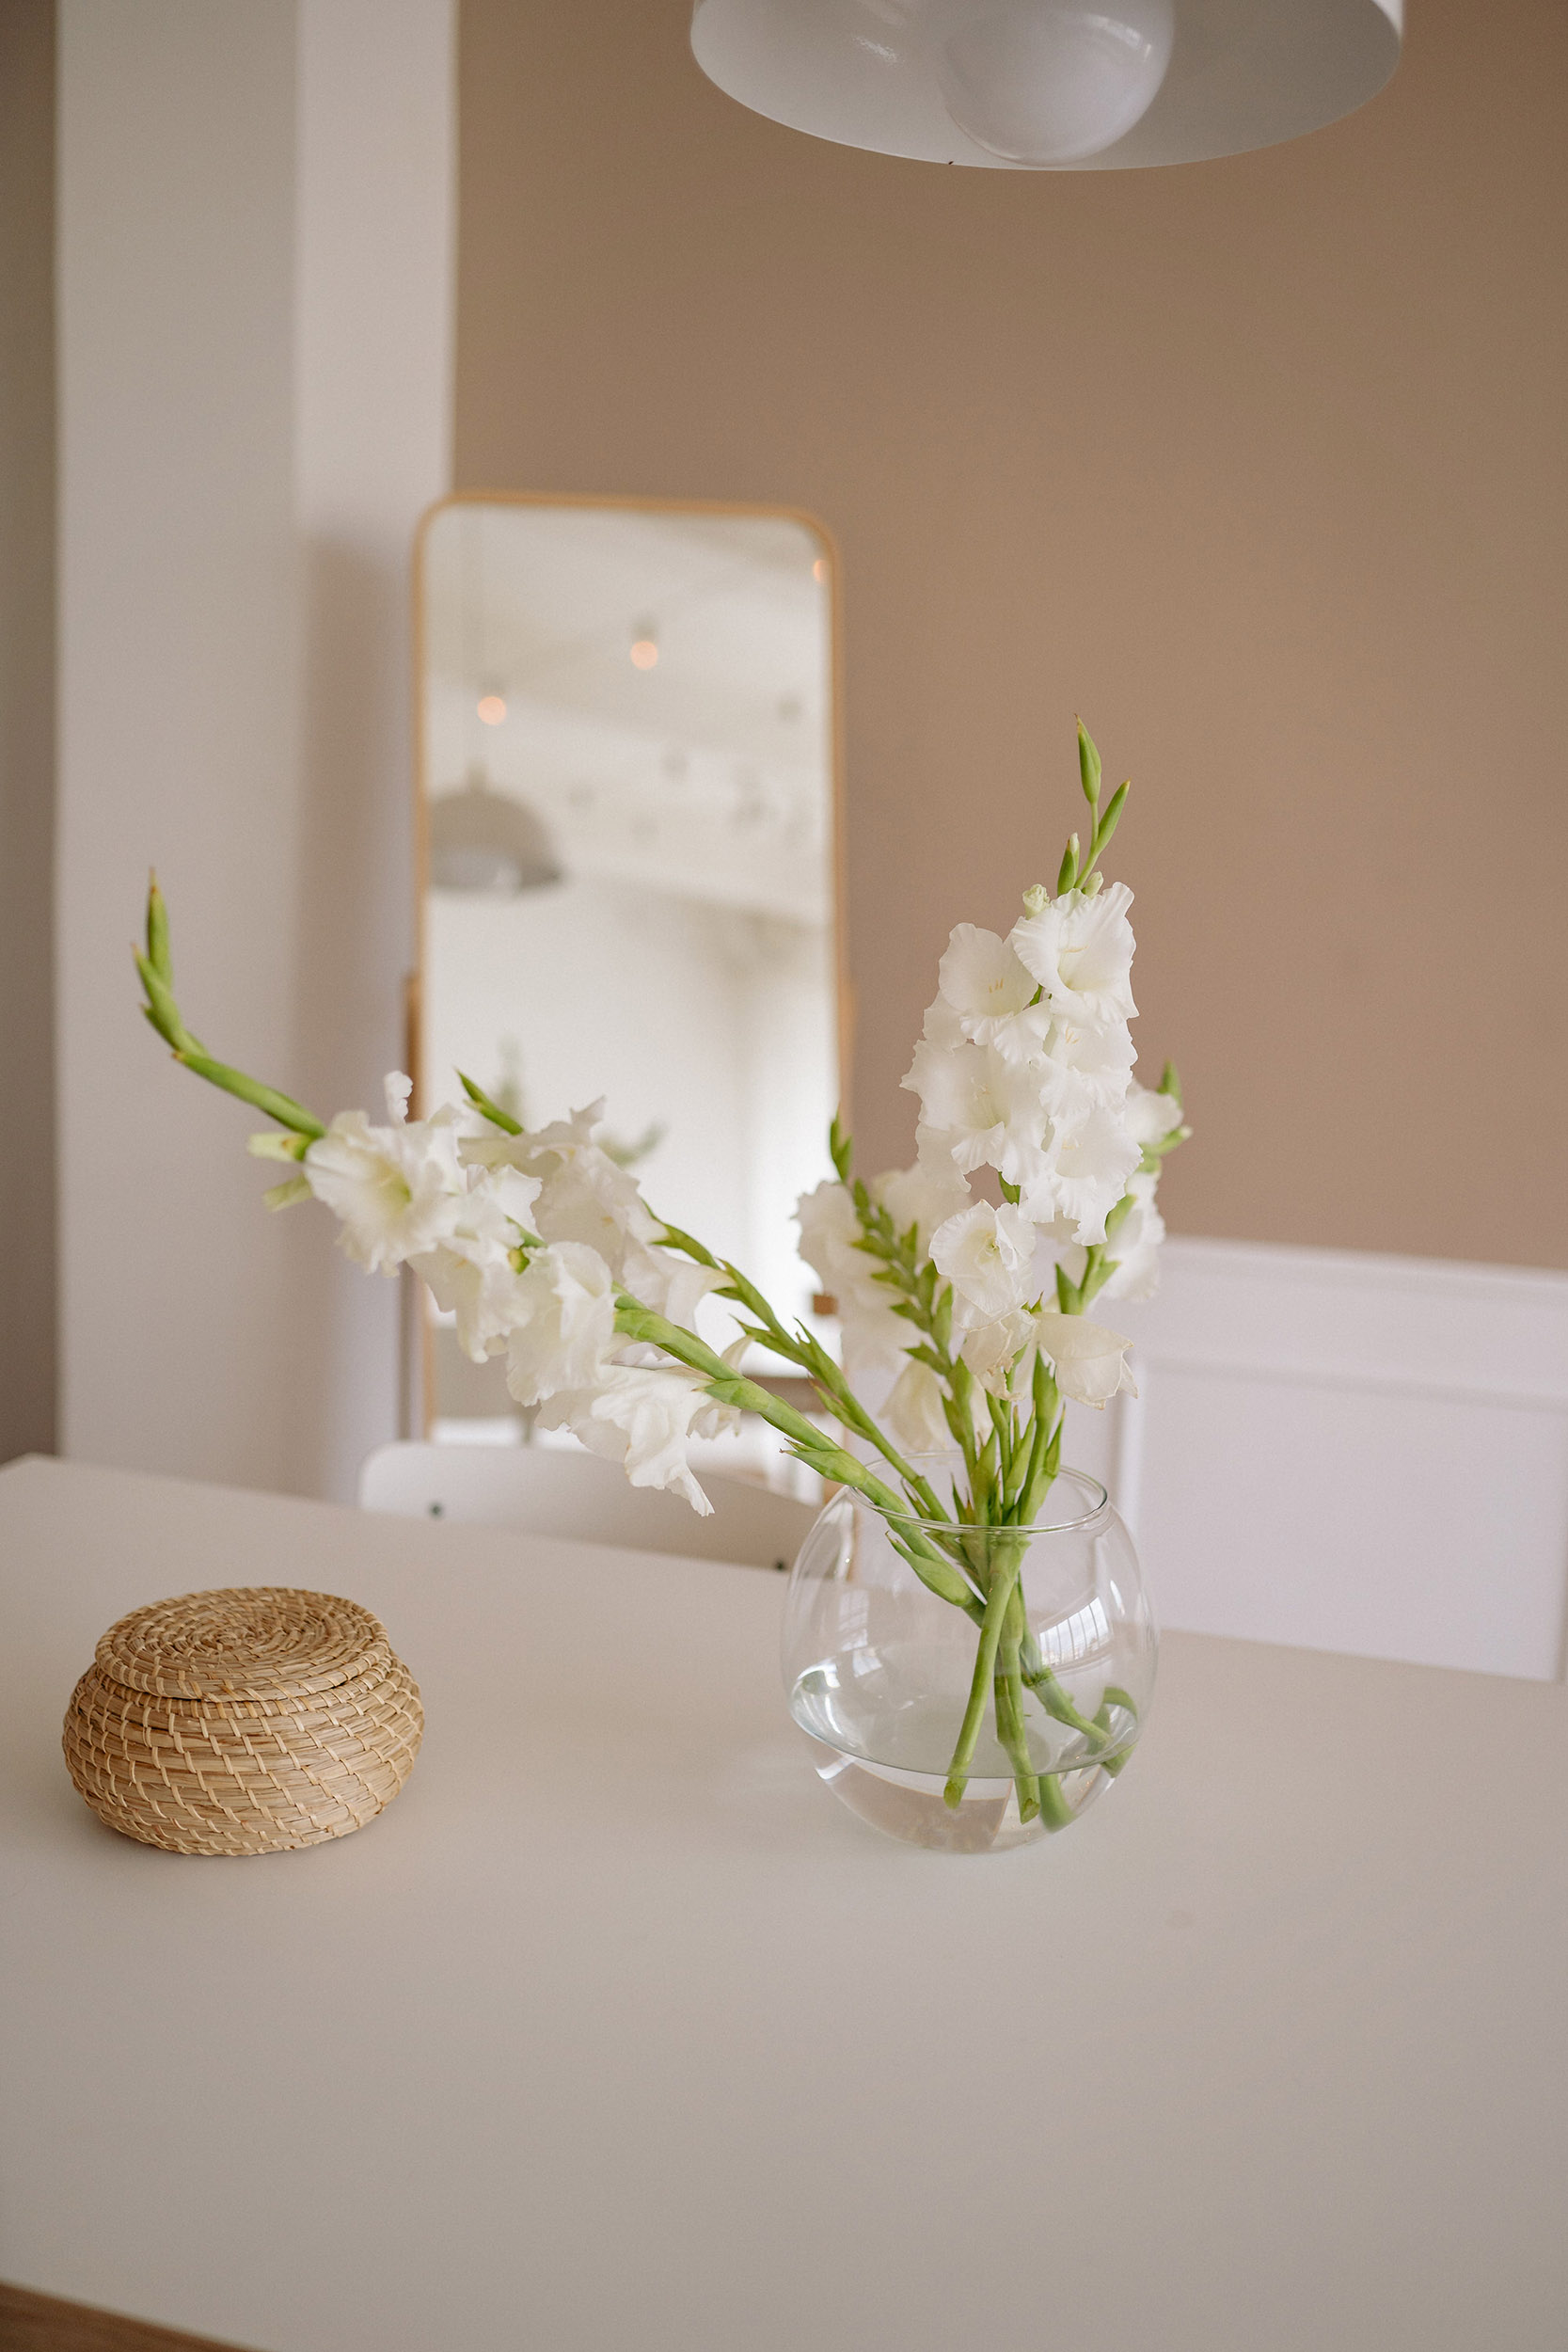 A vase with white flowers and a mirror in the back on a table